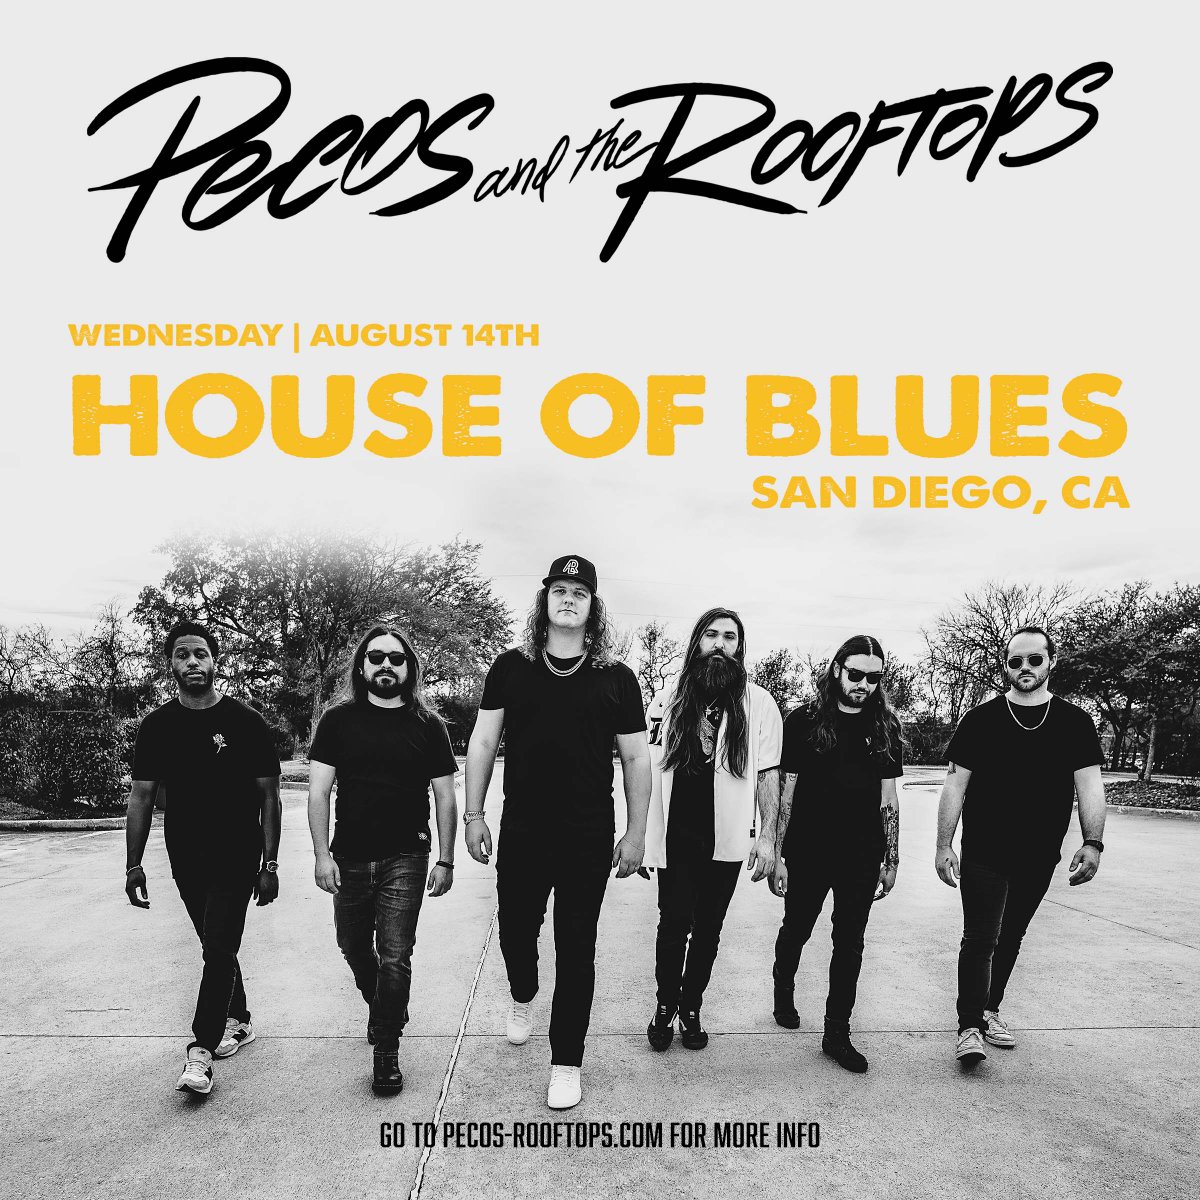 NEW SHOW! Pecos & The Rooftops will be in the house on 8/14! Presale begins on 5/7 @ 10am w/ code: BACKSTAGE. General sale begins on 5/10 @ 8am. To purchase tickets or get more info click: livemu.sc/4a4kuyG @pecos_rooftops